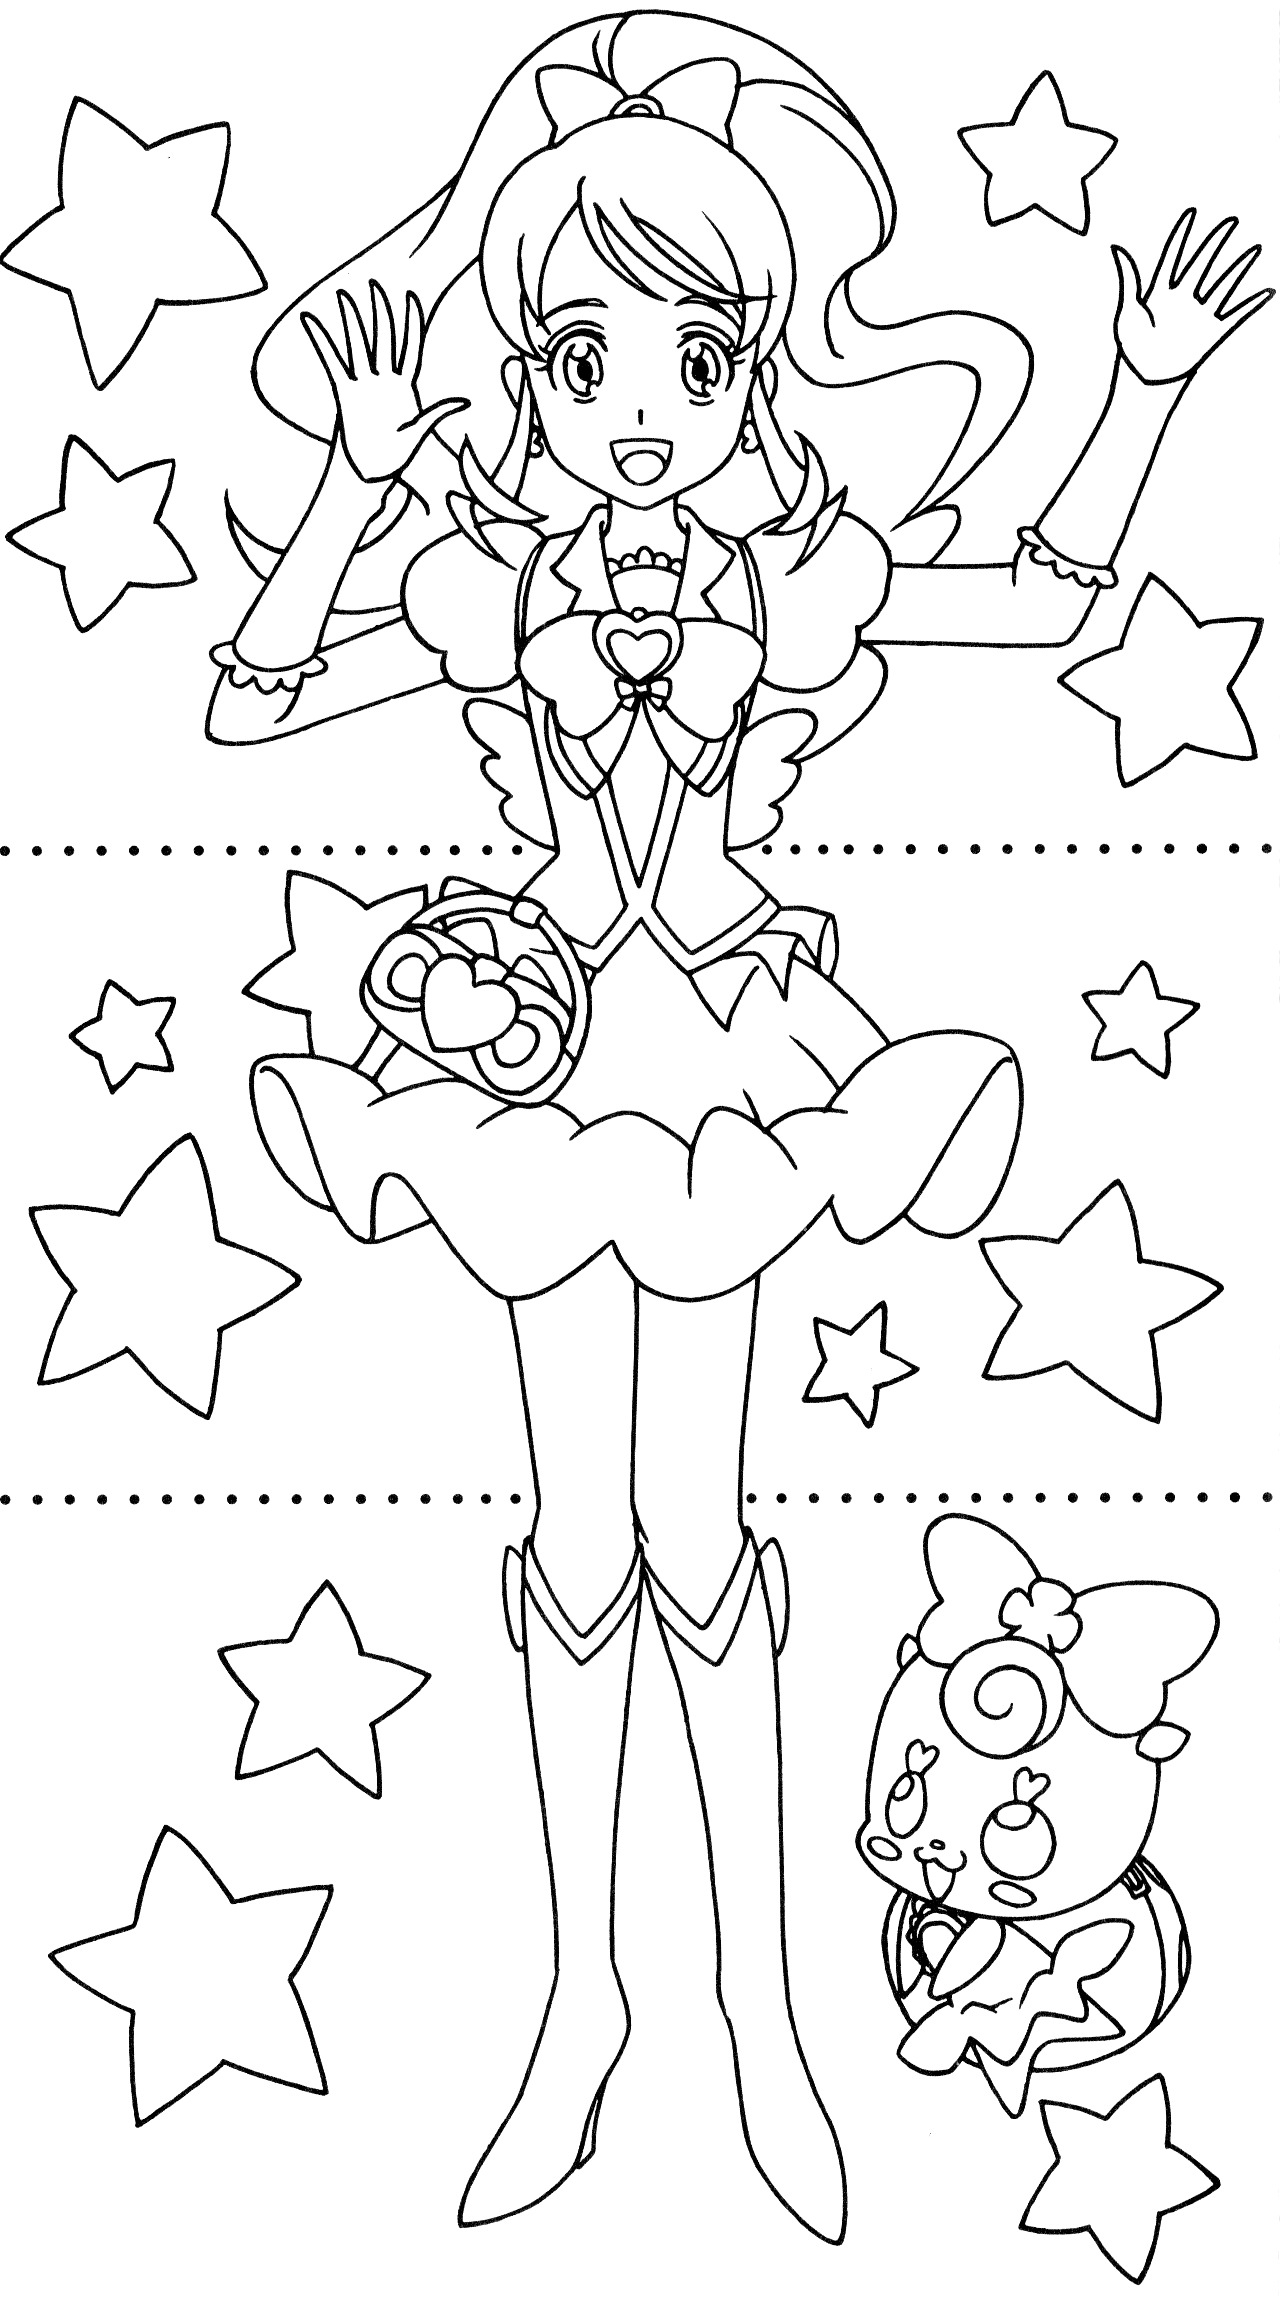 Happiness Charge Precure Dressup Coloring Book 28